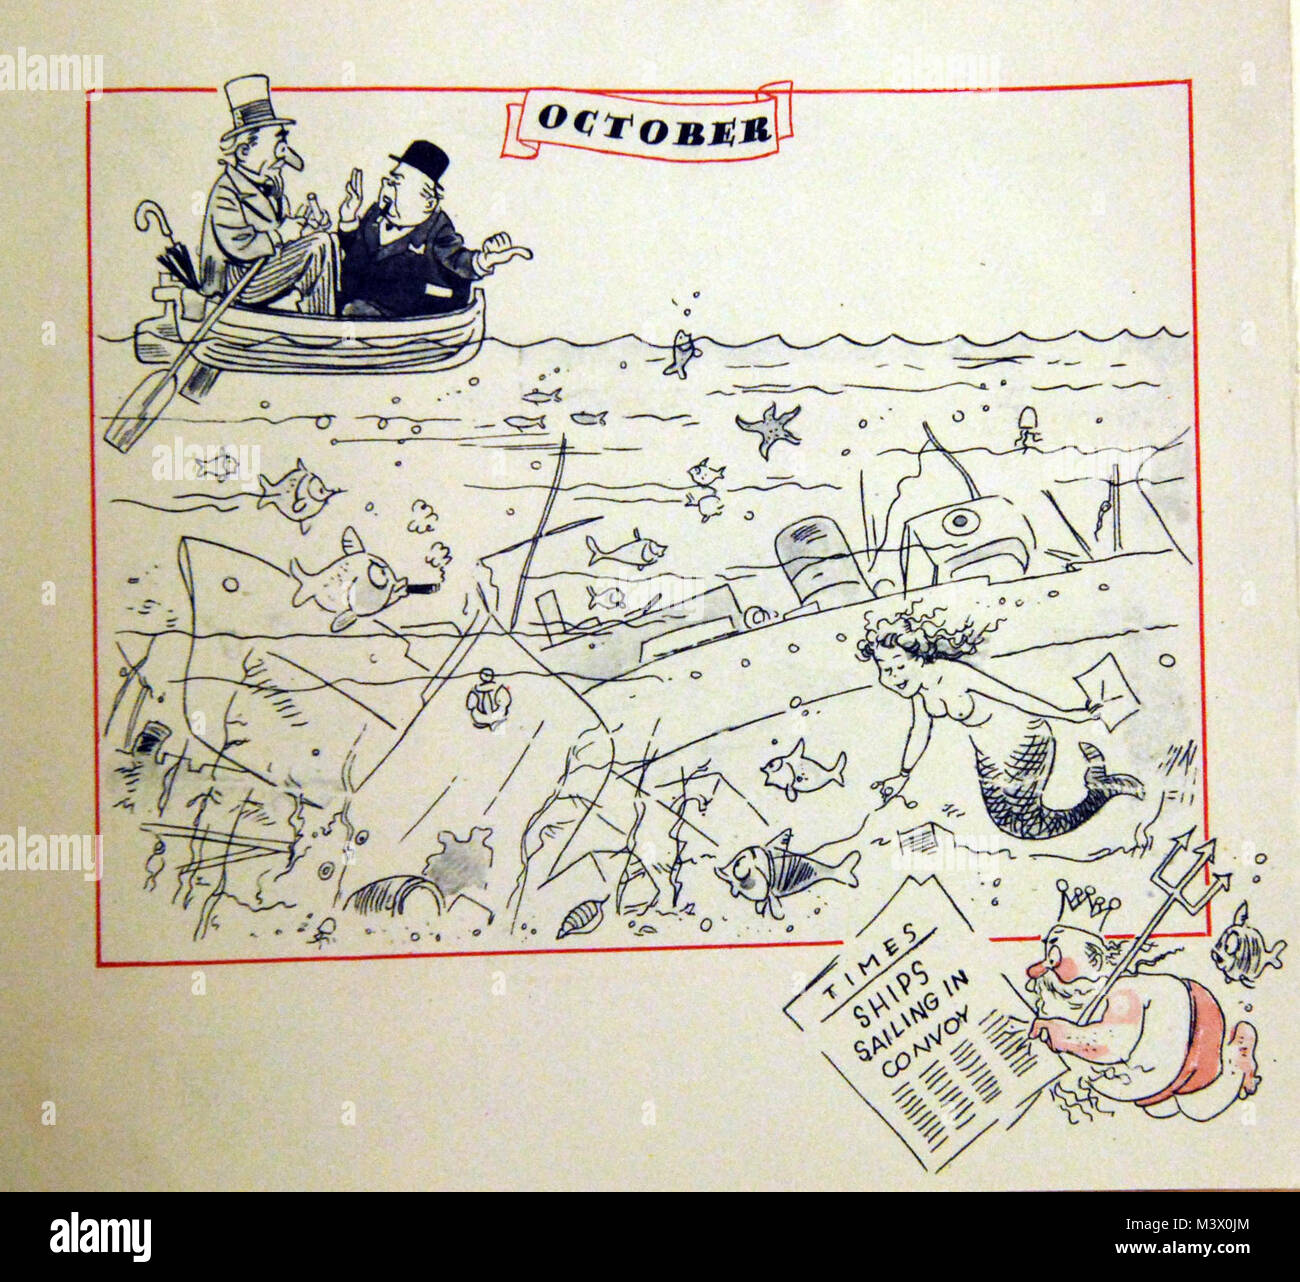 Lot-3867-12: WWII-Cartoons.   Twelve-month pamphlet ridiculing the British war situation in 1940. Shown:  October.  Images shows the precarious journey by sea of merchant tankers in convoys.   Courtesy of the Library of Congress.  (2018/02/02). Lot-3867-12 39334600614 o Stock Photo